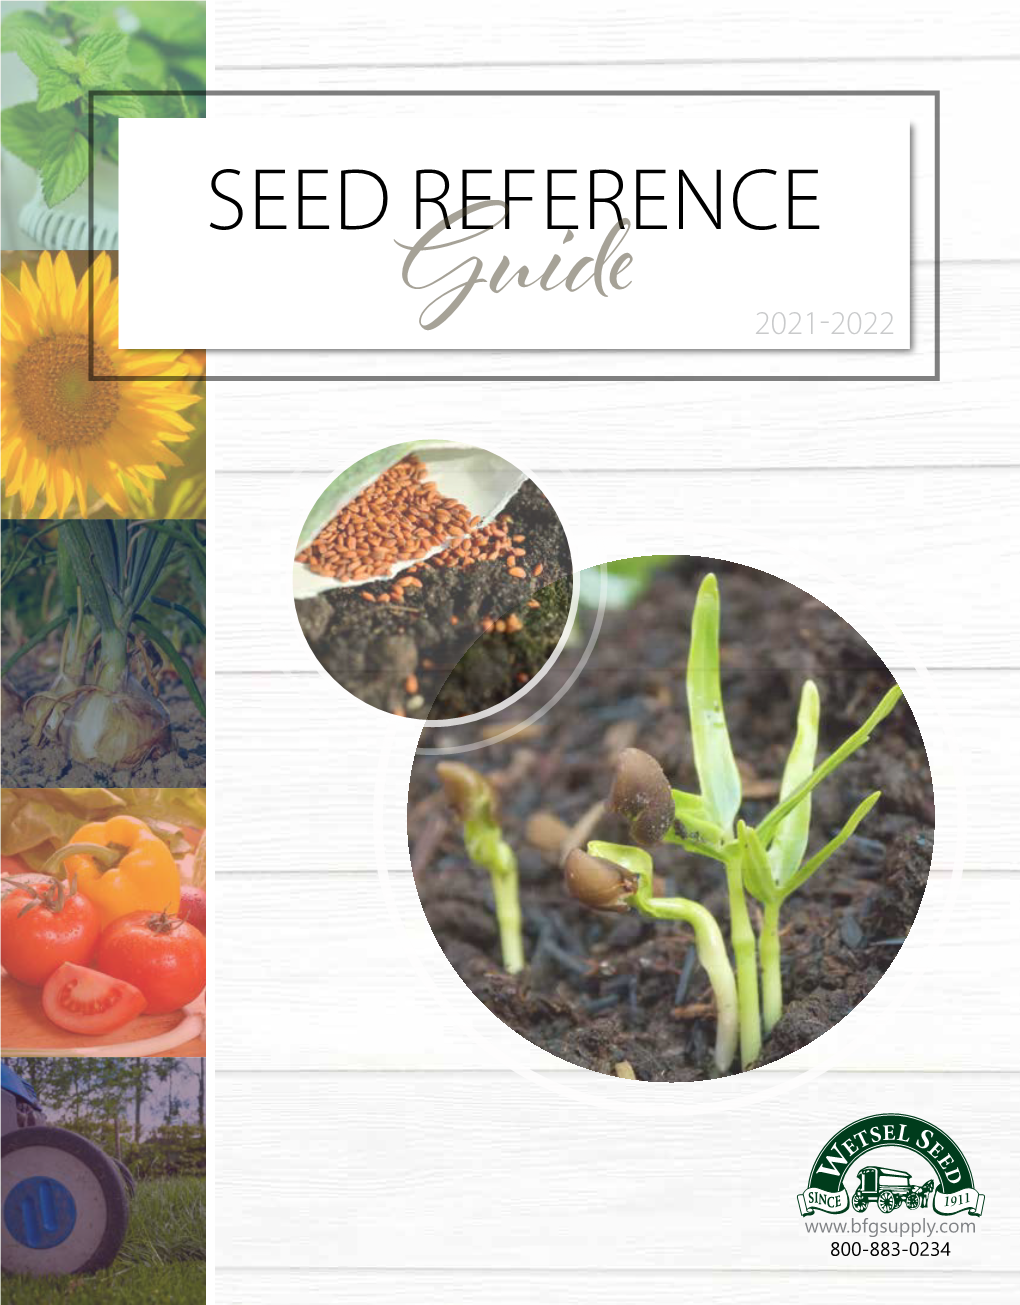 SEED REFERENCE Guide 2021-2022